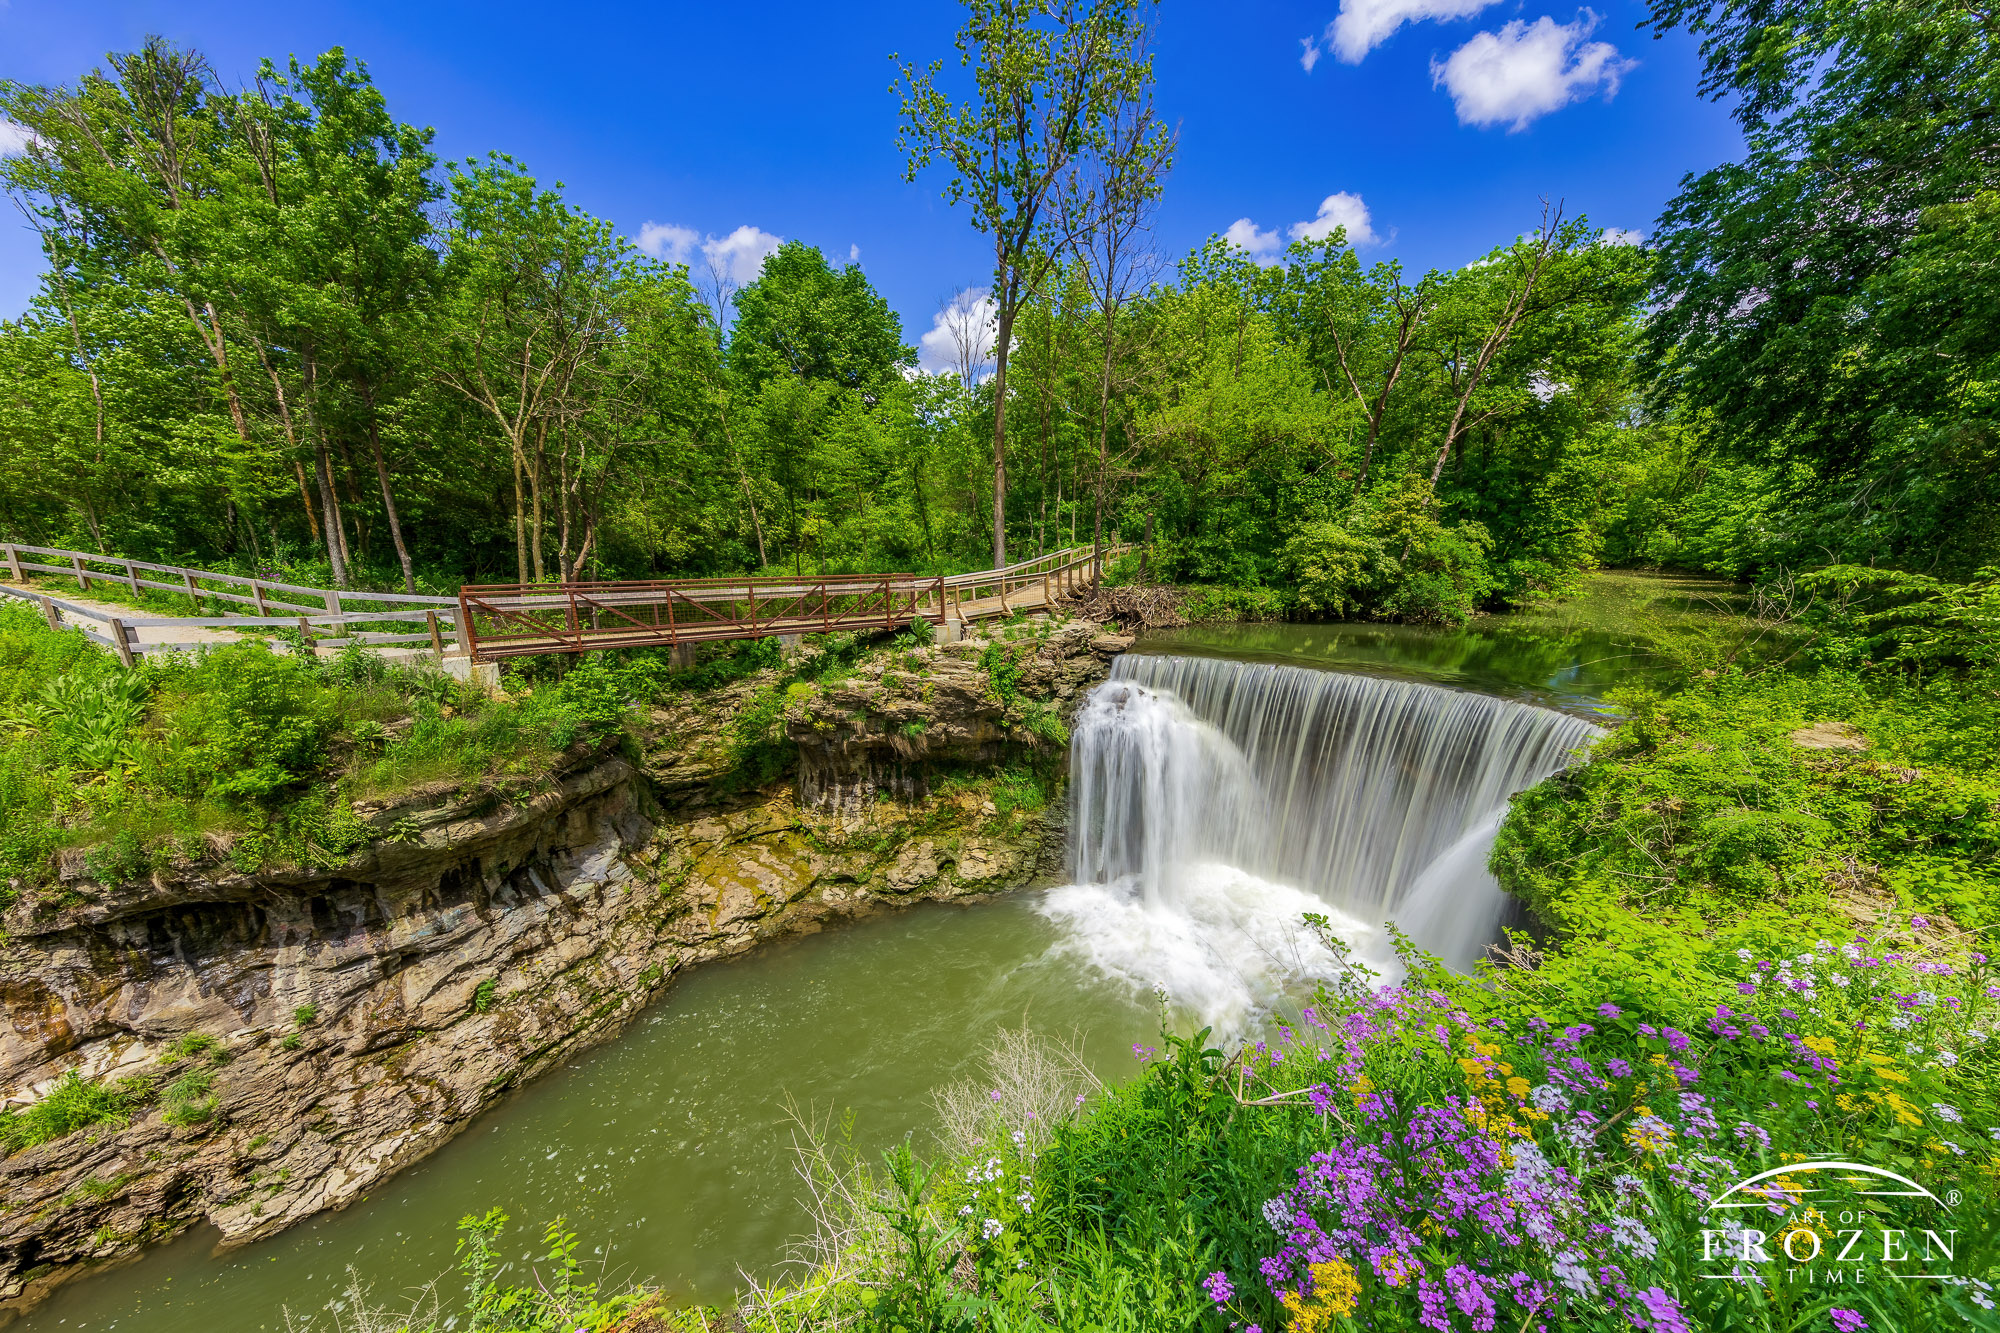 Cedar Cliff Falls near Cedarville waterfall on a perfect spring day where Ohio’s lush green vegetation surrounds Massie Creek as it spills into the gorge